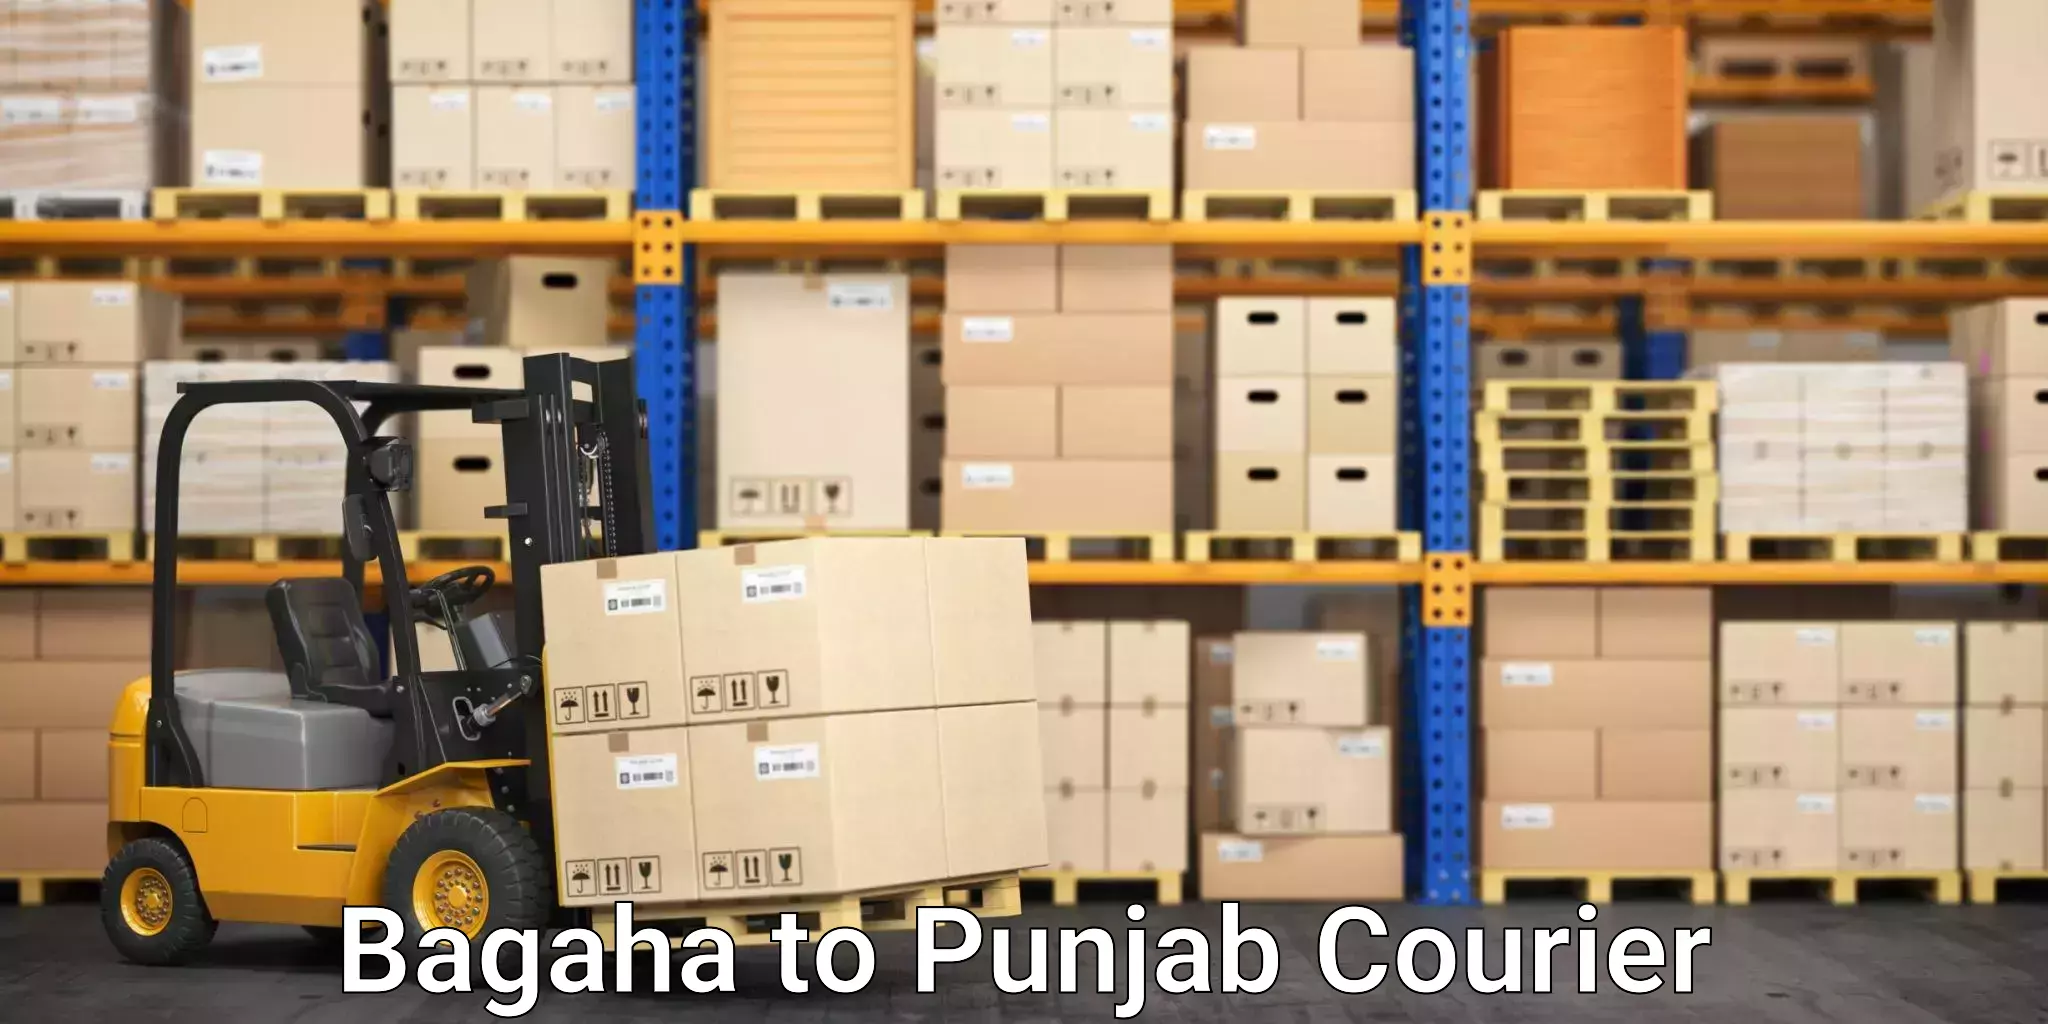 Reliable relocation services Bagaha to Ludhiana